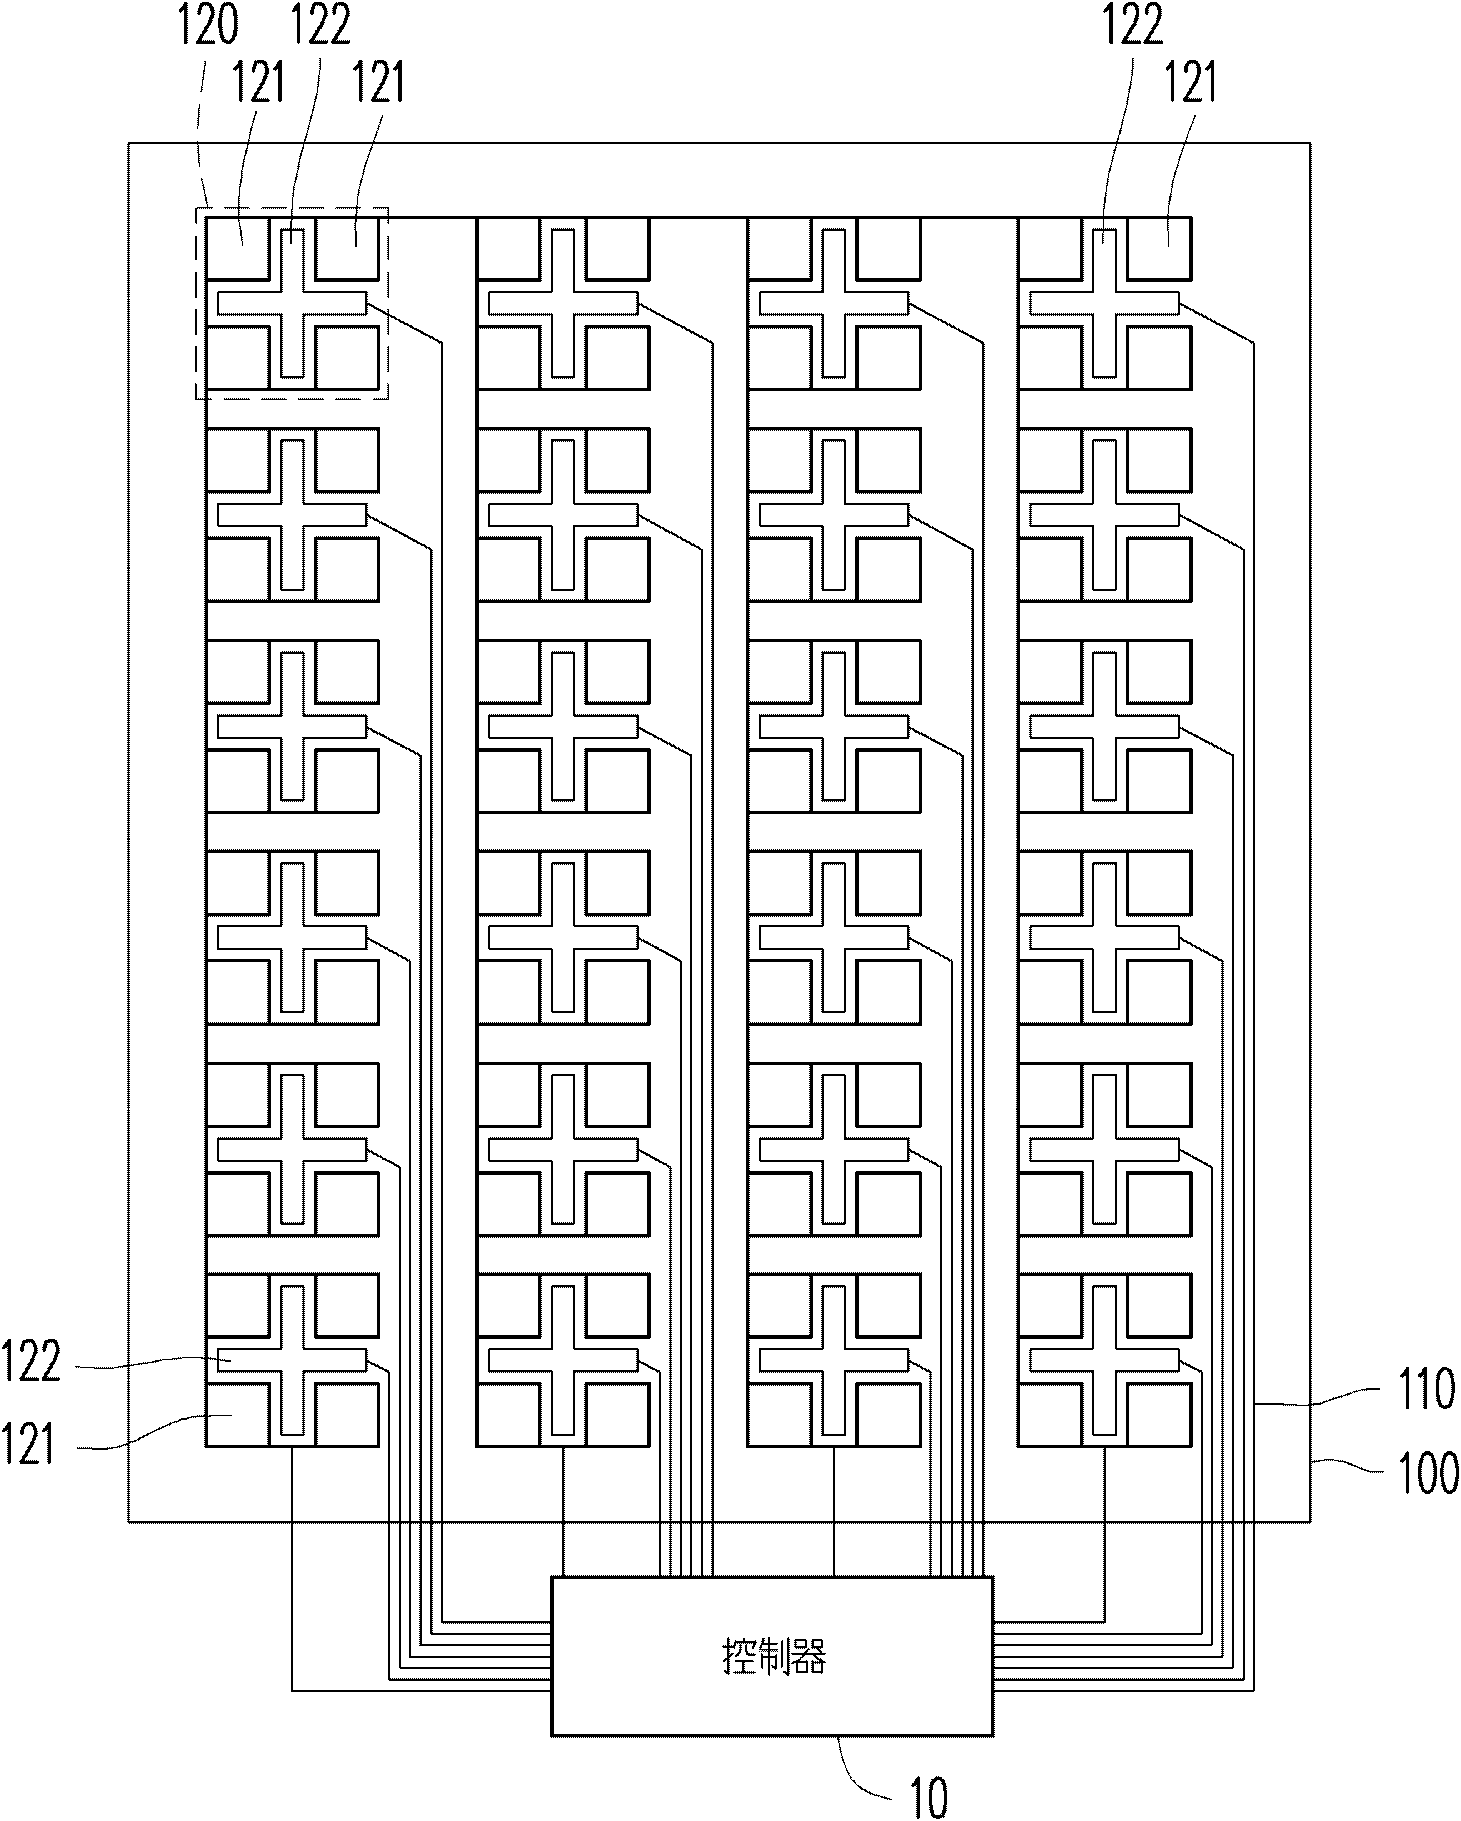 Layout structure of capacitive touch panel